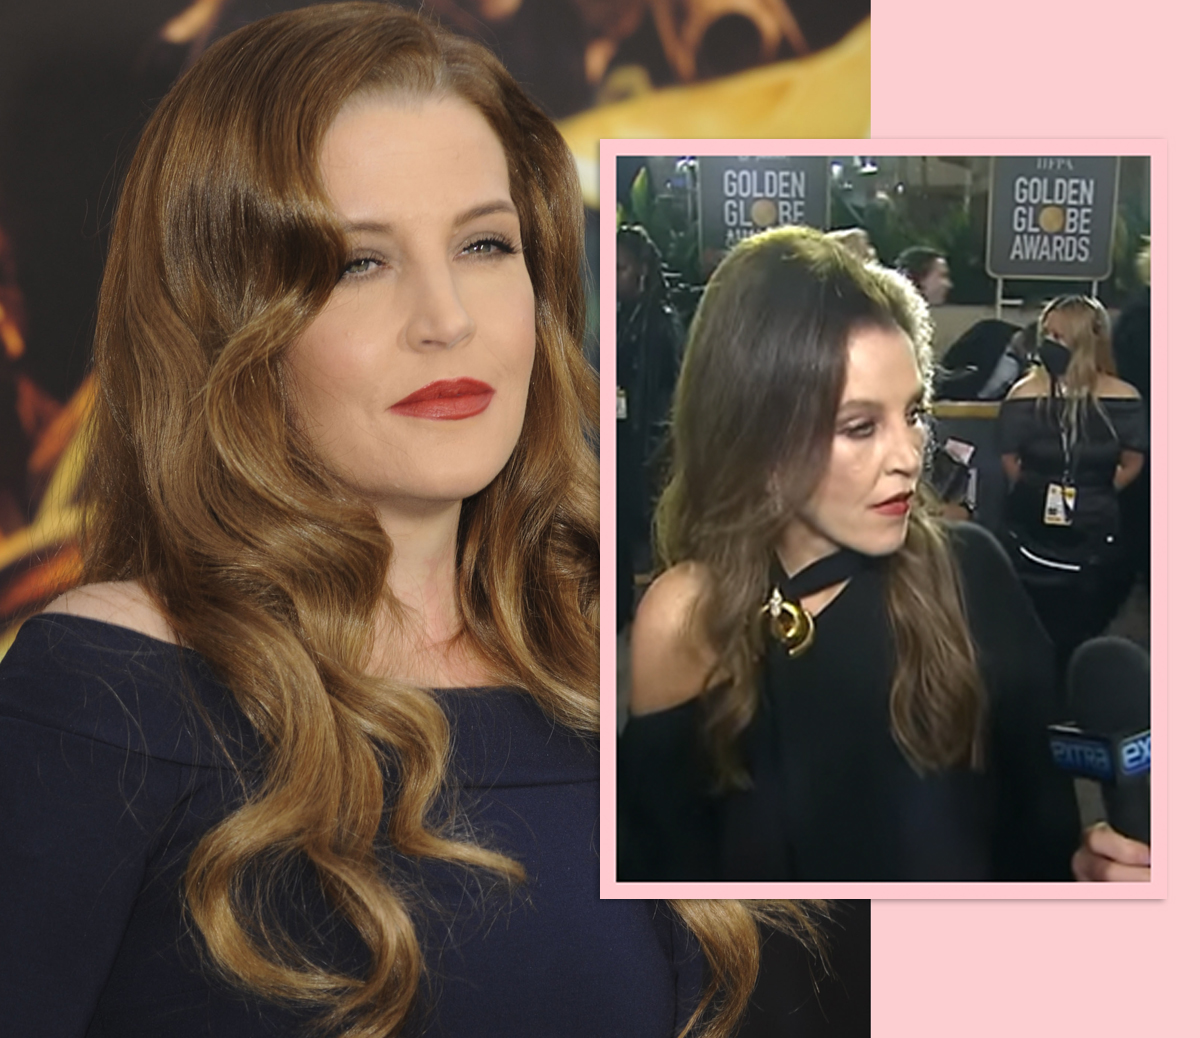 #Lisa Marie Presley Reportedly Felt ‘Stressed’ About Being Seen In Public For The Golden Globes Before Her Death